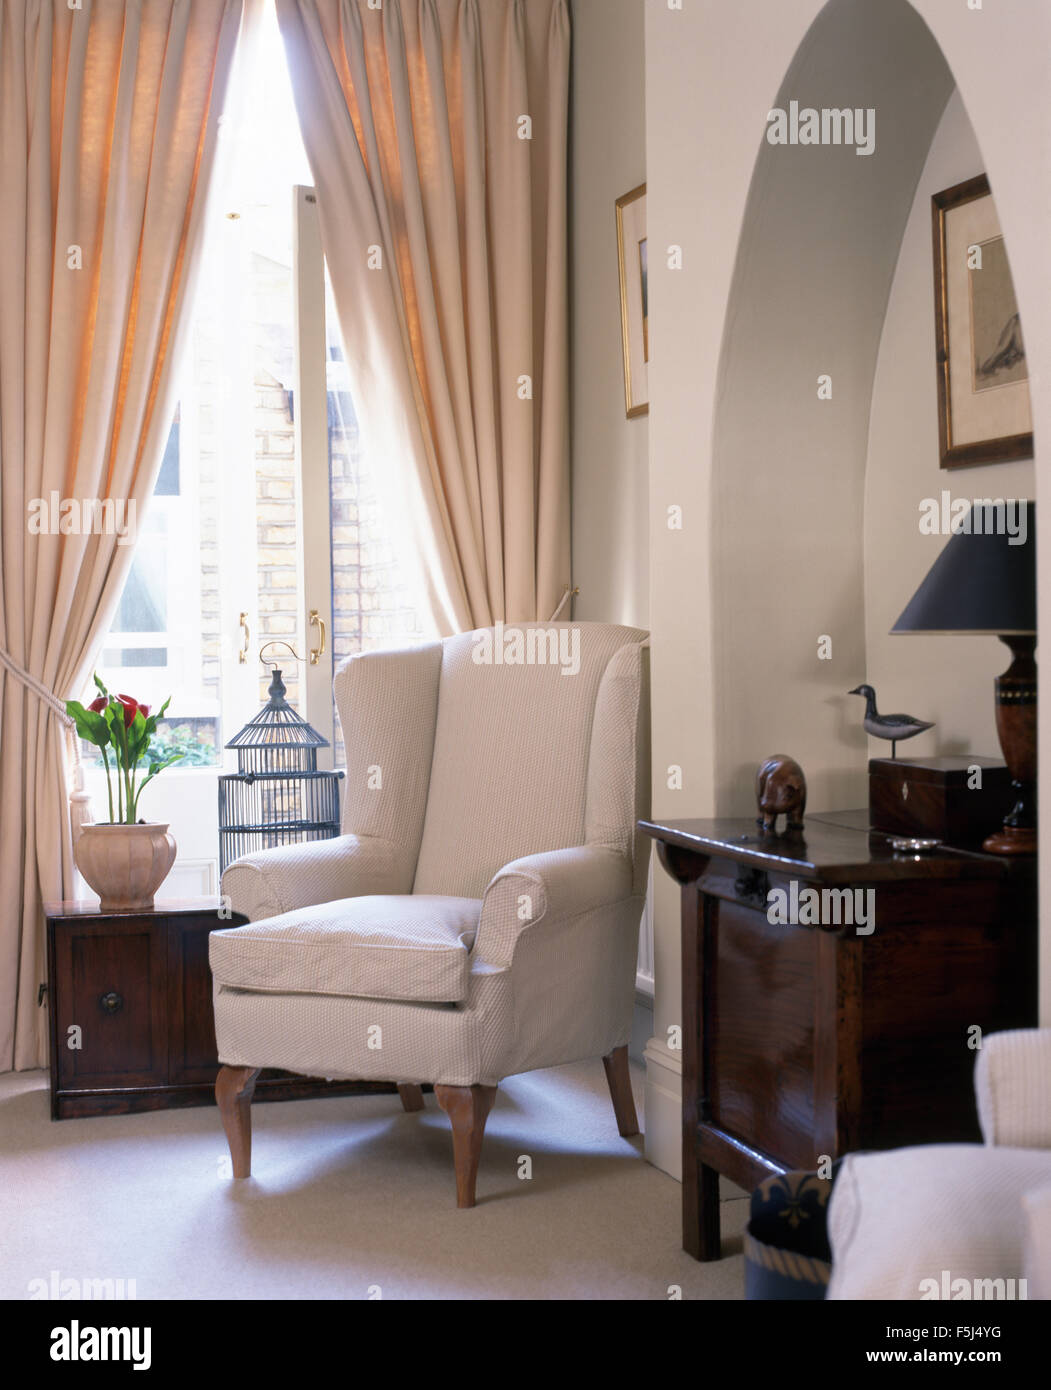 White wing chair in front of window with cream drapes in townhouse living room with an antique chest in the alcove Stock Photo